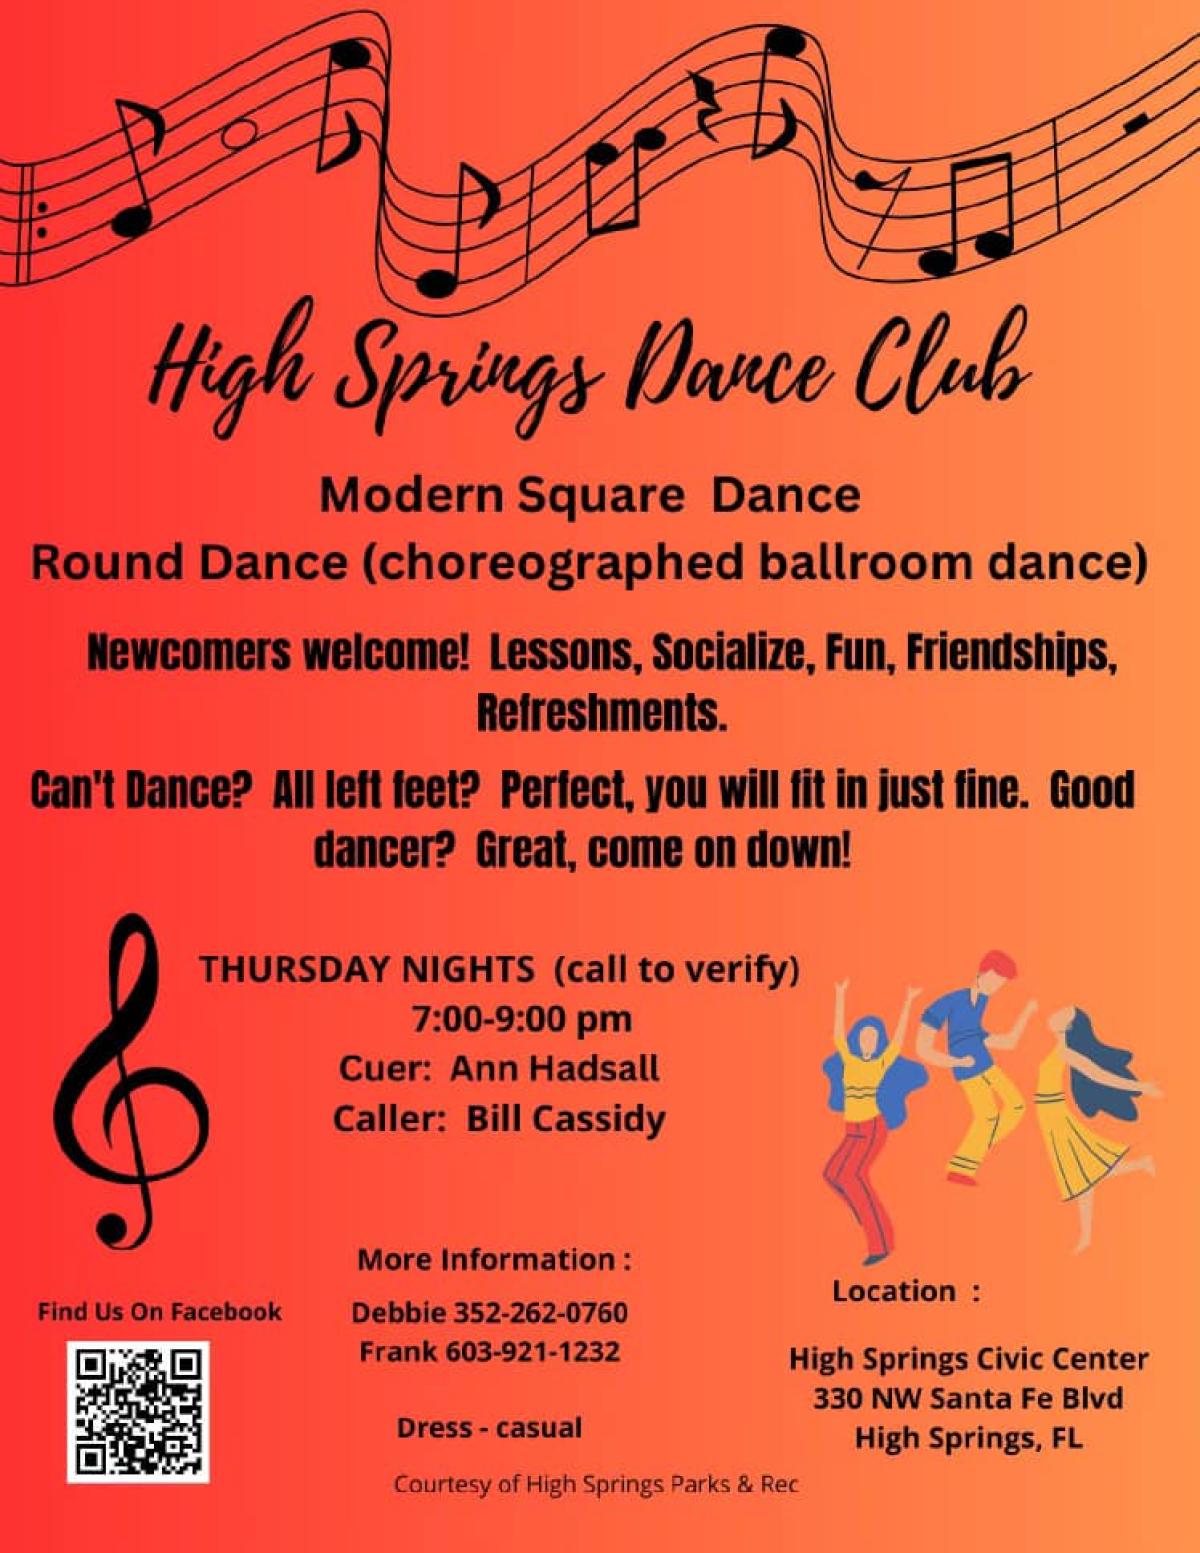 dance club poster. Call 352-262-0760 for more information.